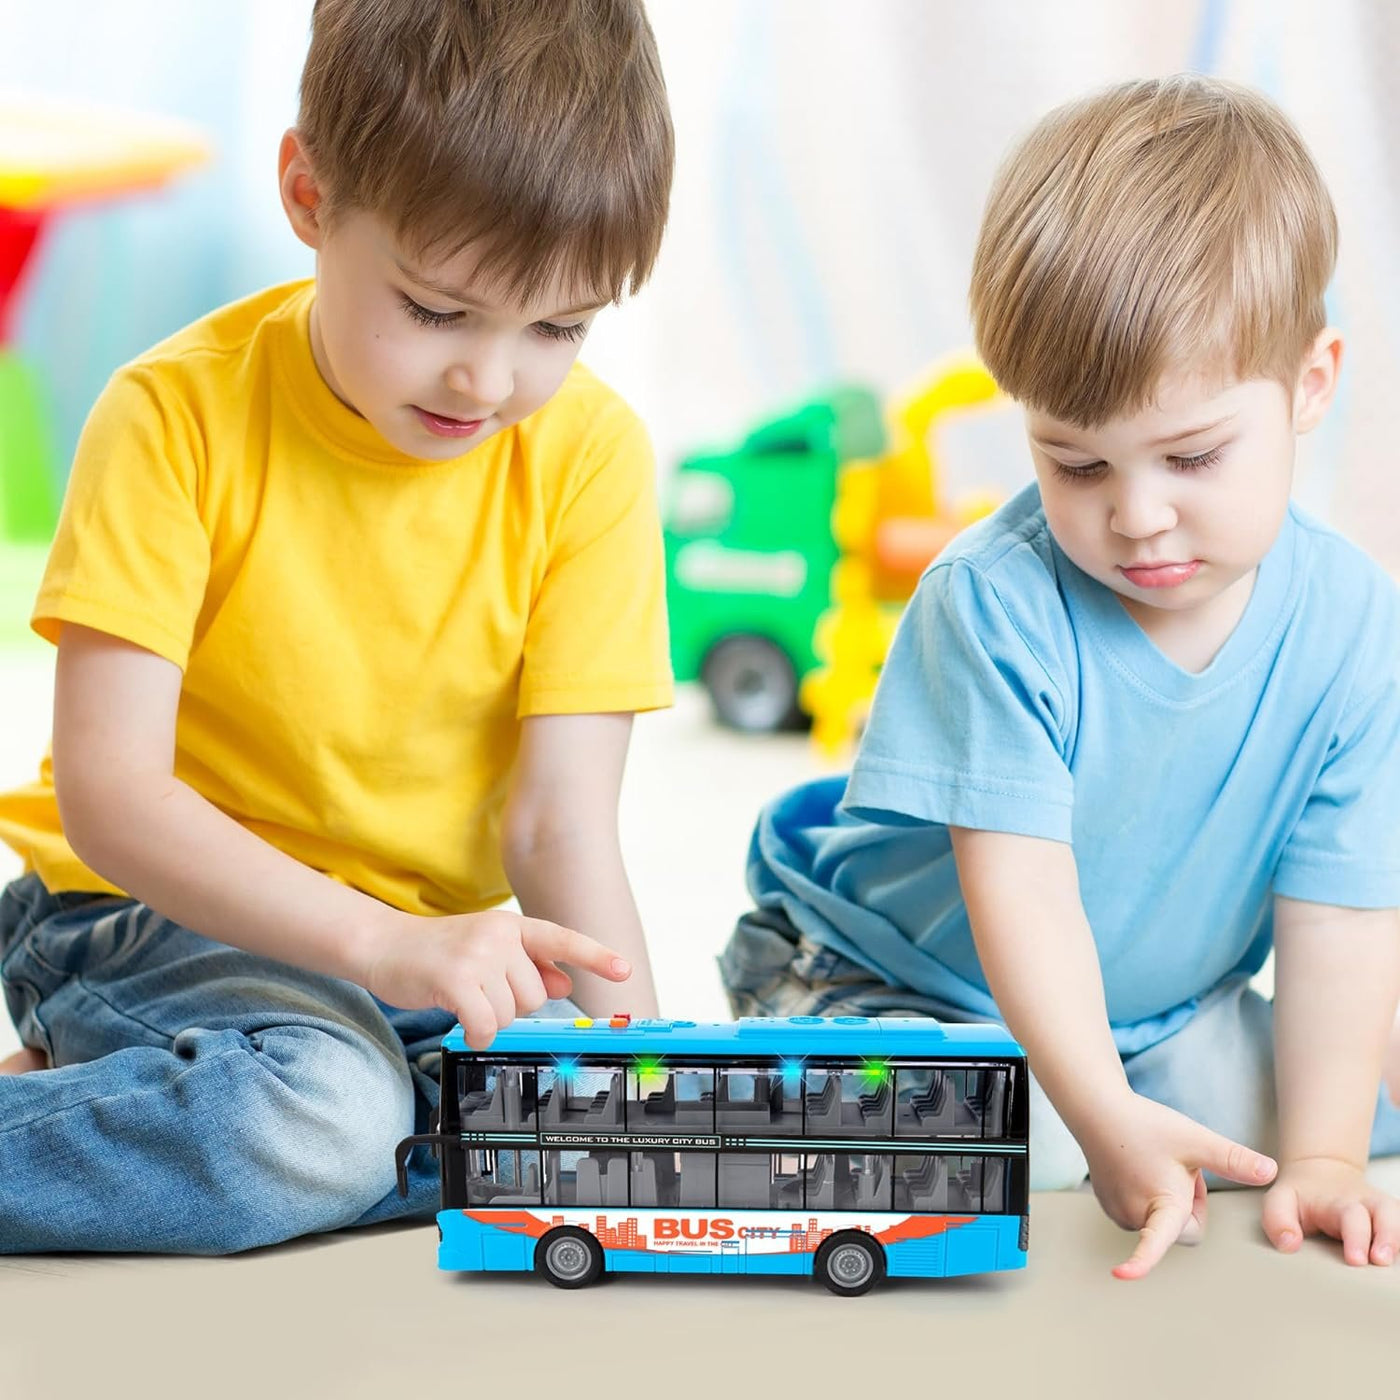 Die Cast Double Decker Bus Toy with Lights & Sounds - Friction Powered Bus Toy for Kids with Indoor Ceiling Lights and 4 Different Sounds - Doors Open - Gift for Kids Ages 3-8